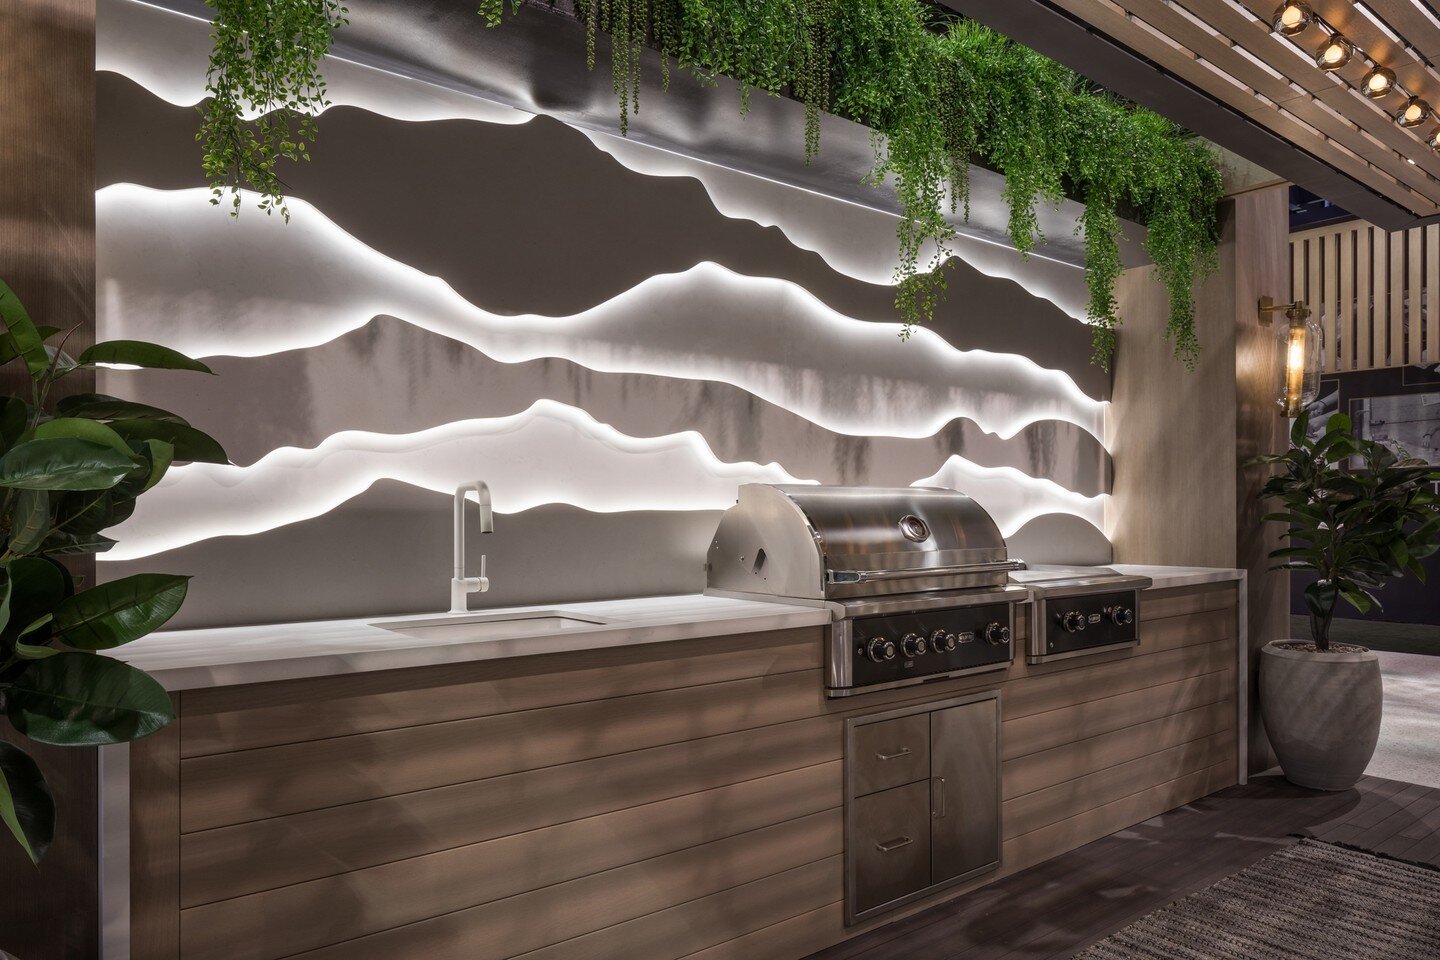 Bring the beauty of the outdoors to your backyard with our stunning outdoor quartz. Our backlit LED pieces replicate the natural wonder of clouds or mountains, adding a touch of elegance to your outdoor BBQ. Experience the perfect blend of style and 